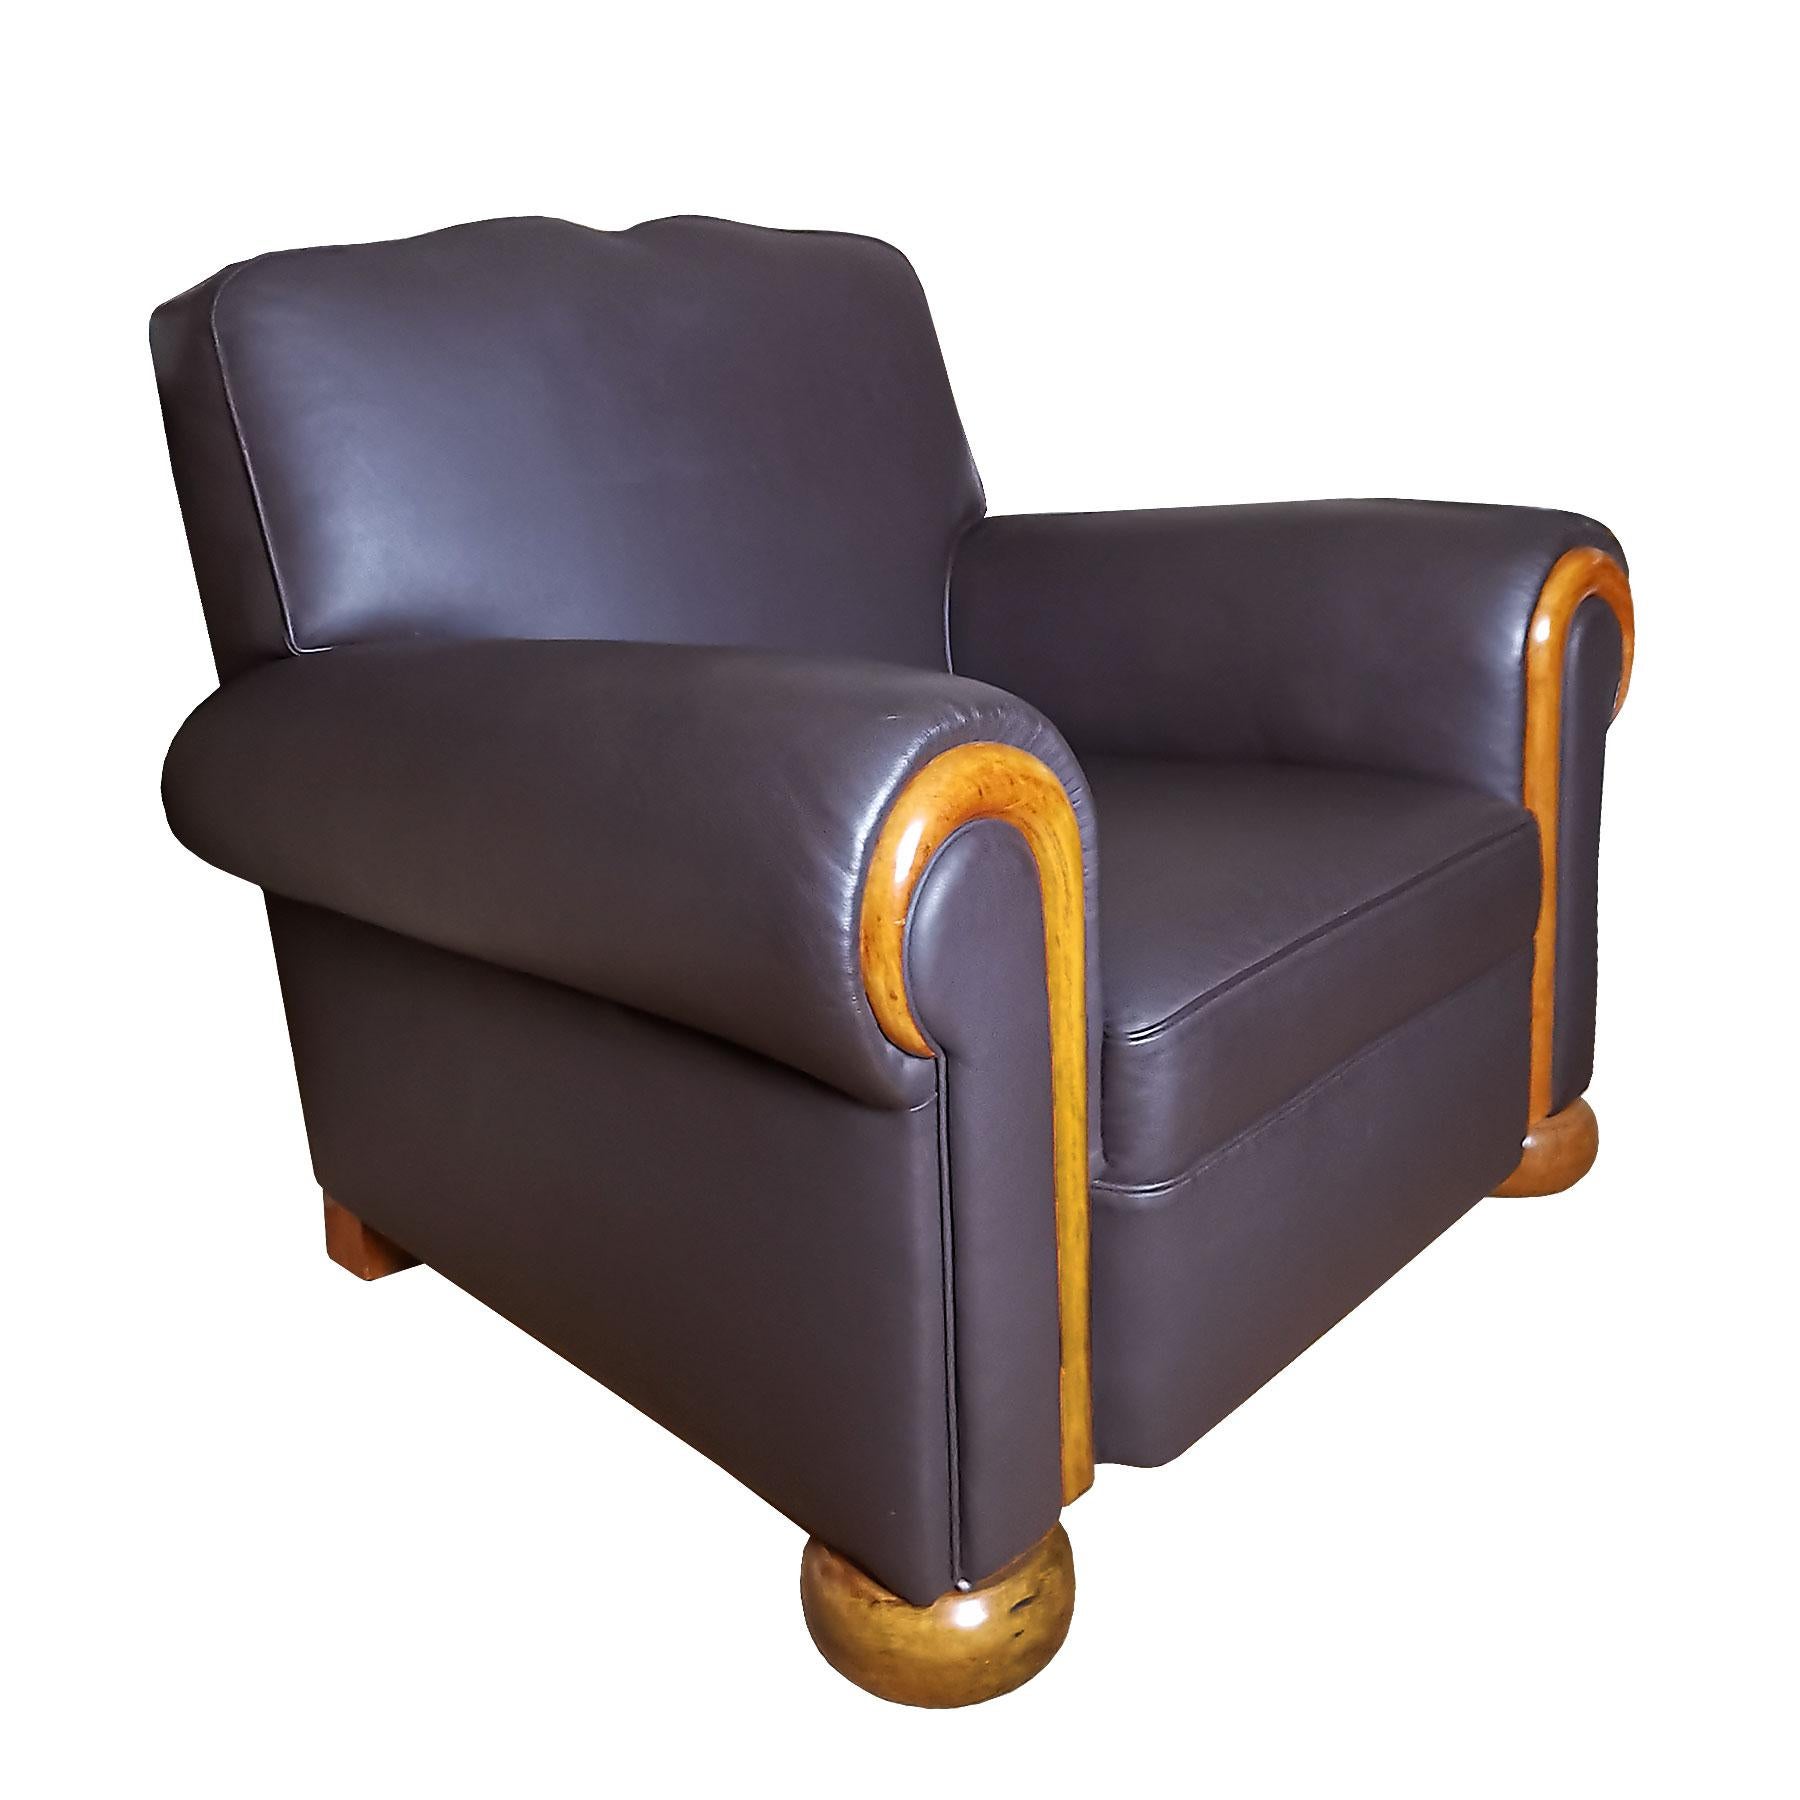 Belgian Big Mid-Century Modern Club Armchair, Wood and Chocolate Leather - Belgium For Sale